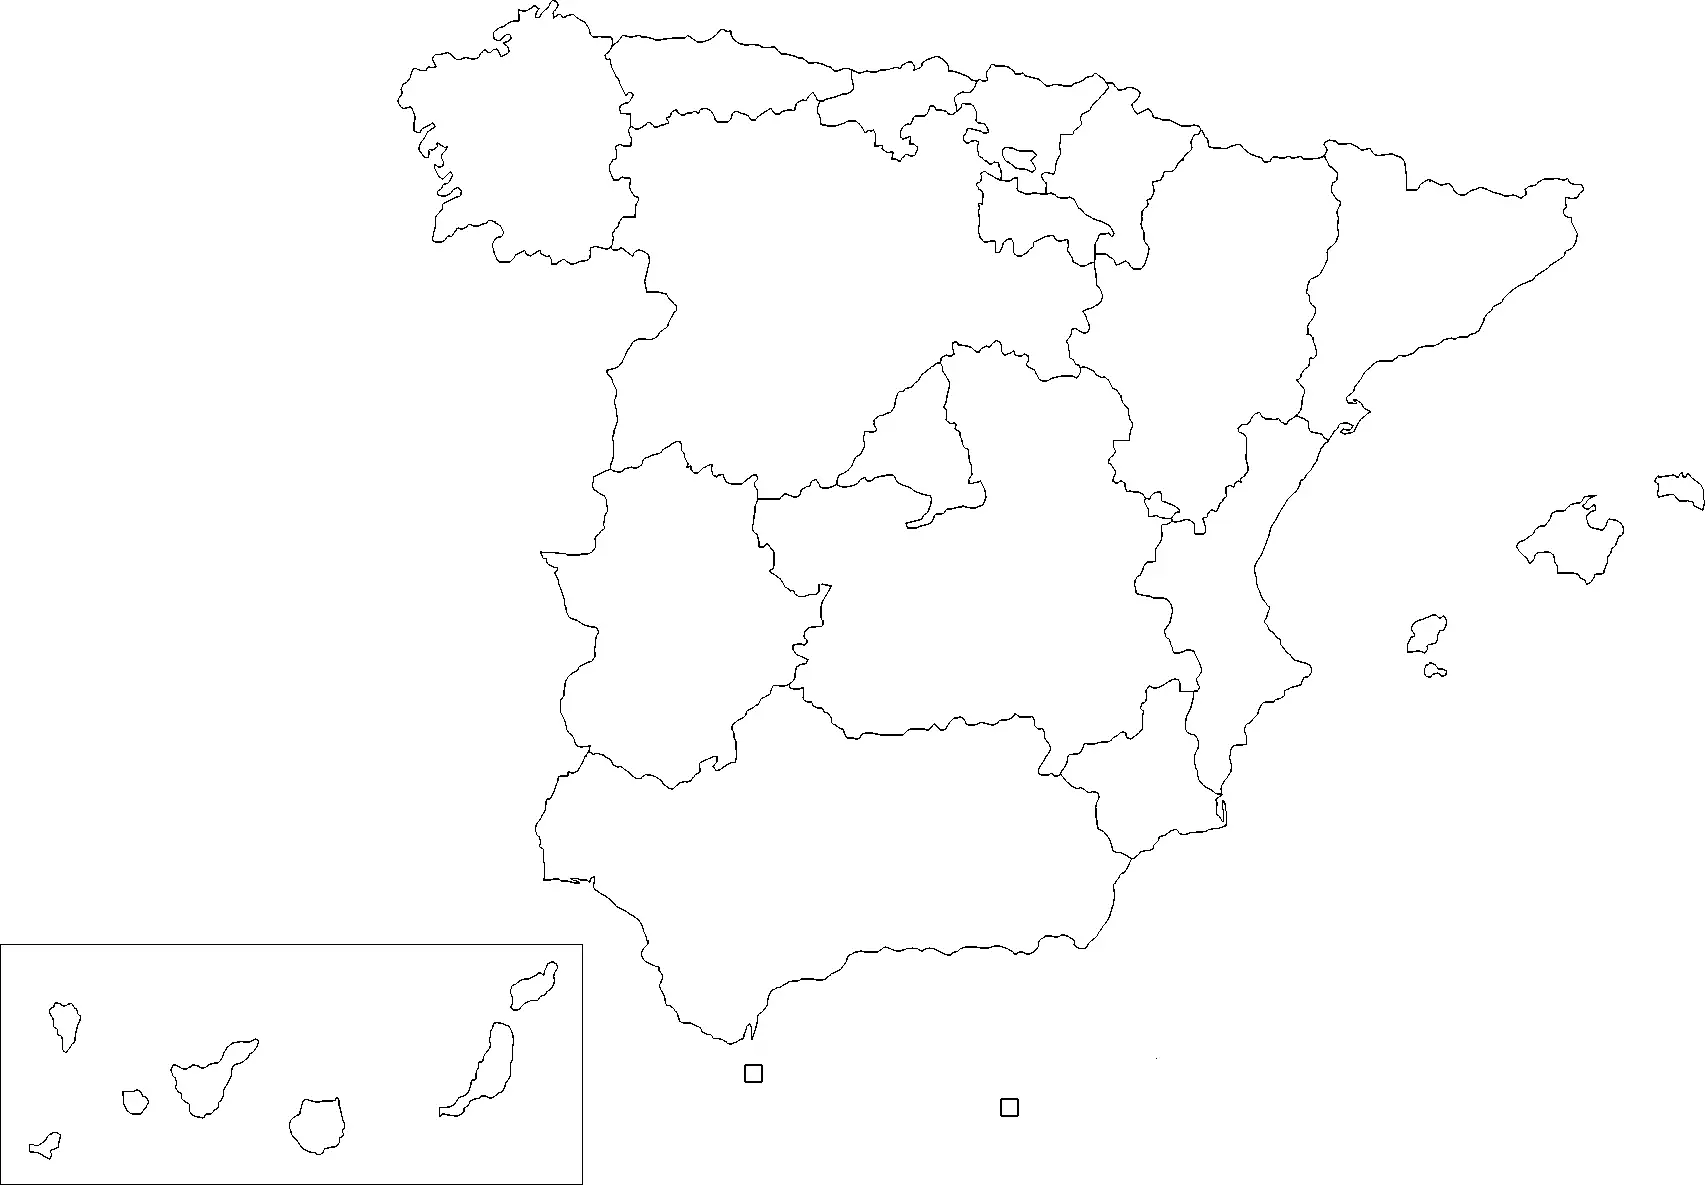 Spain maps. Click on the Ccaa of Spain (blank Map) to view it full screen